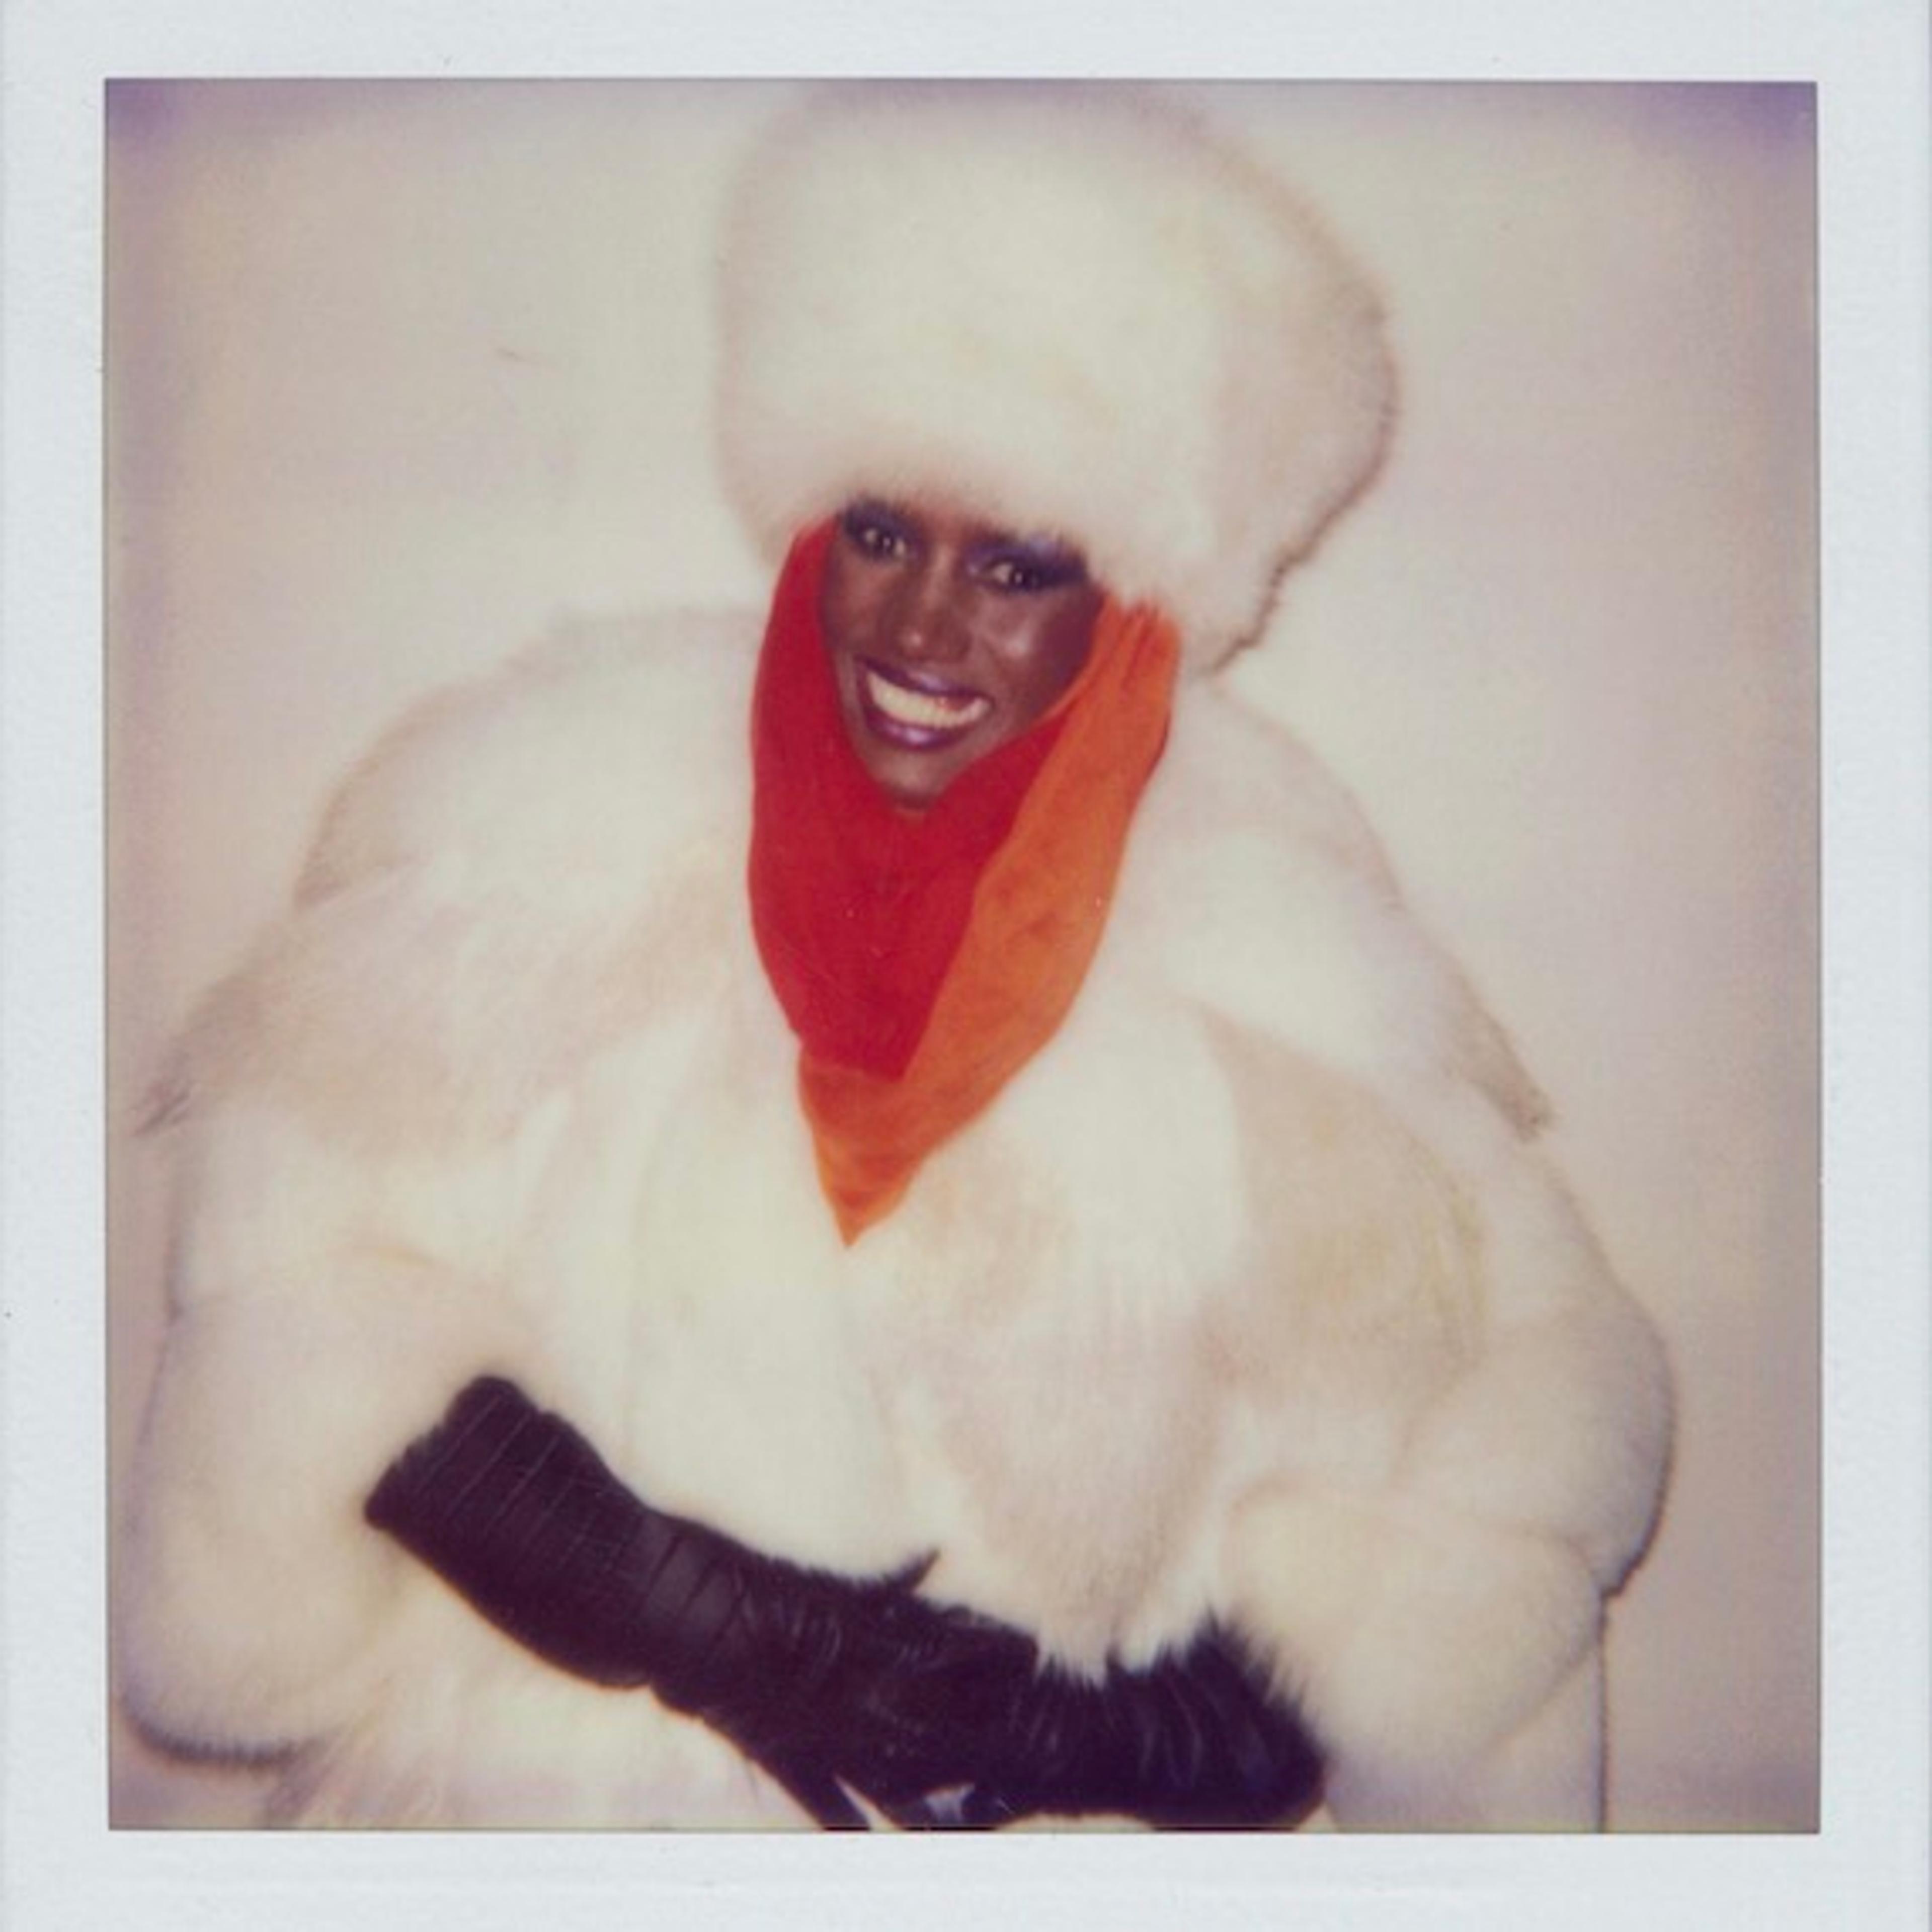 A Polaroid photograph of Grace Jones smiling against a plain background, in a white fur coat and hat